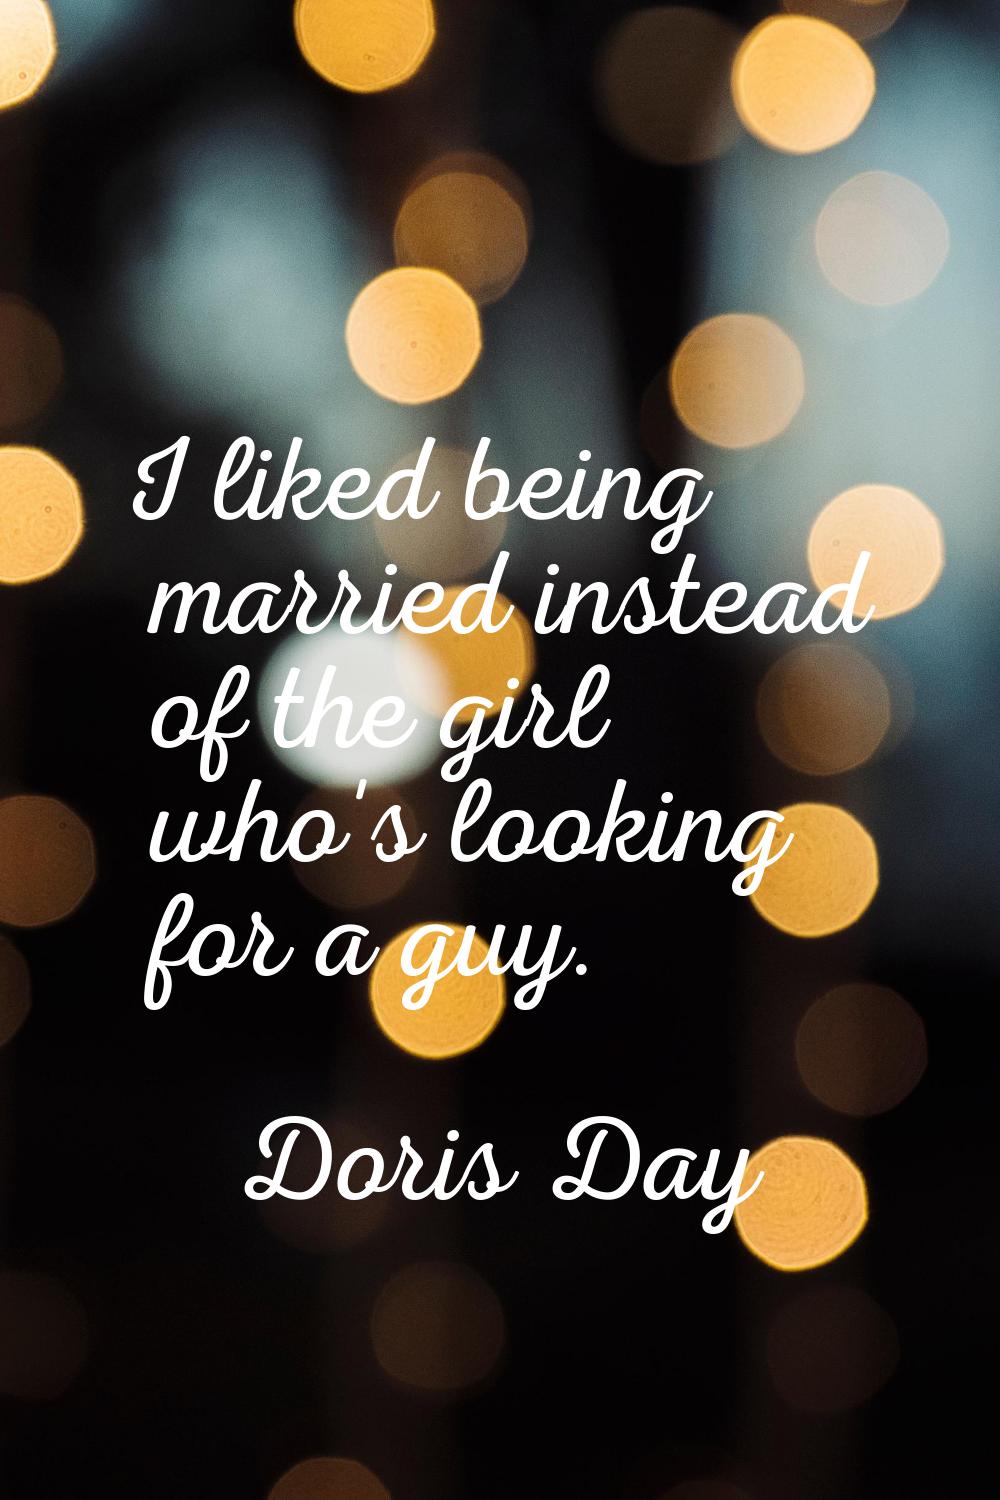 I liked being married instead of the girl who's looking for a guy.